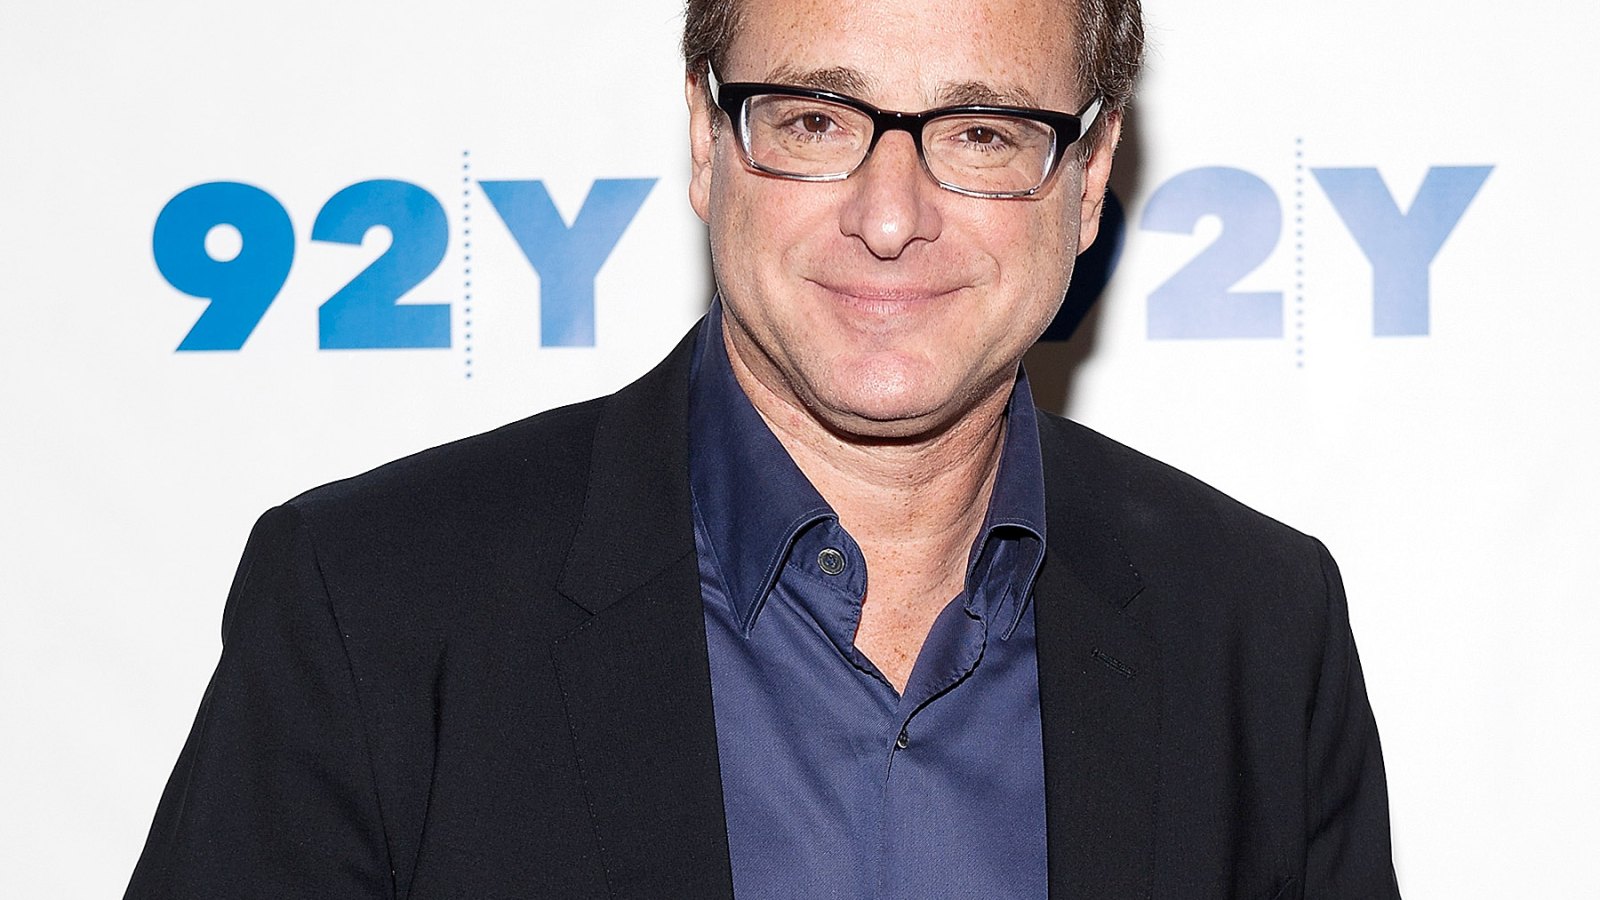 Bob Saget attends an event on April 8, 2014 in New York City